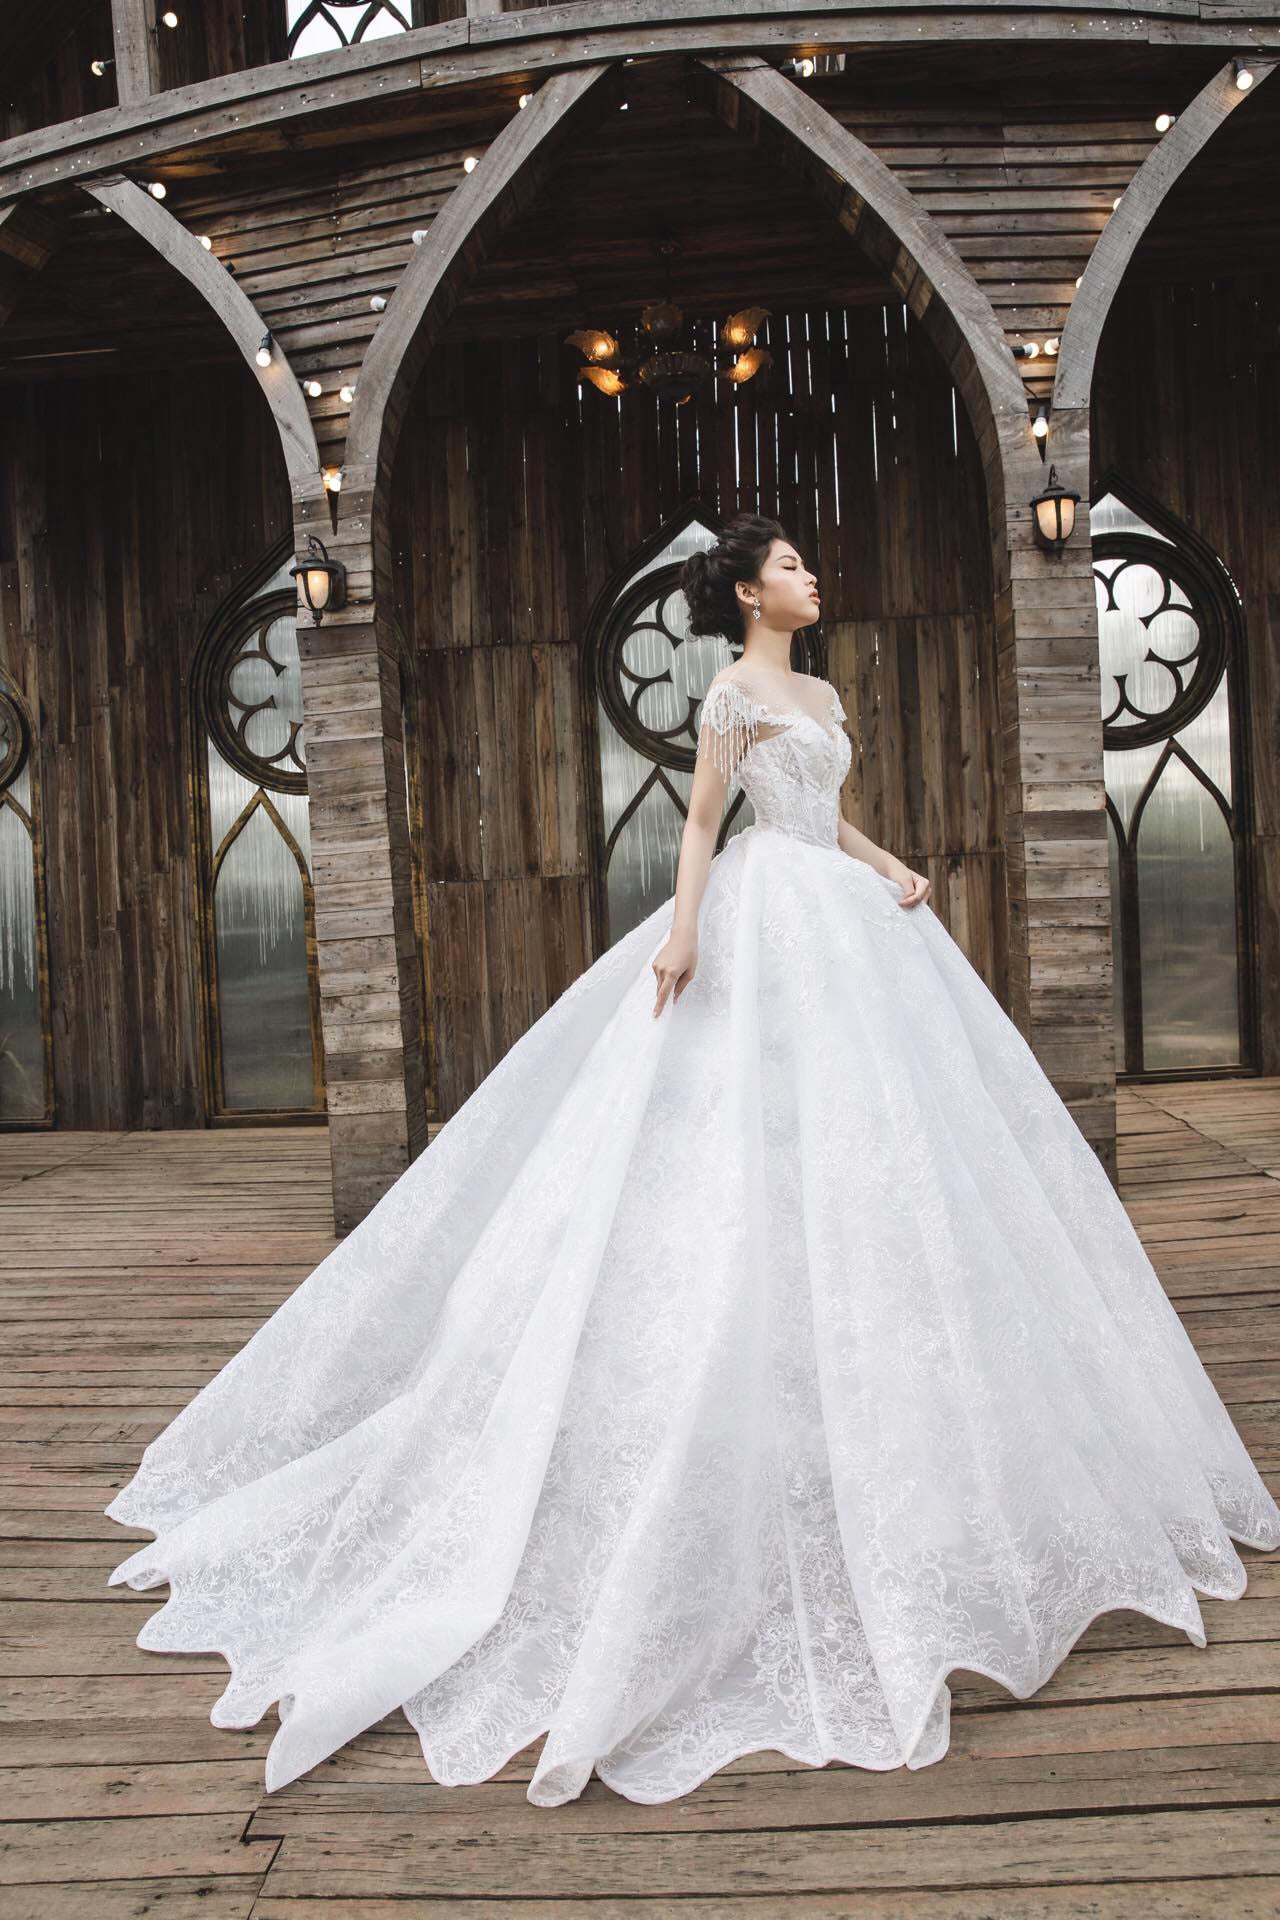 Omorose - Radiate Elegance: Off-Shoulder A-Line Princess Wedding Dress with Sparkling and Luxury Accents